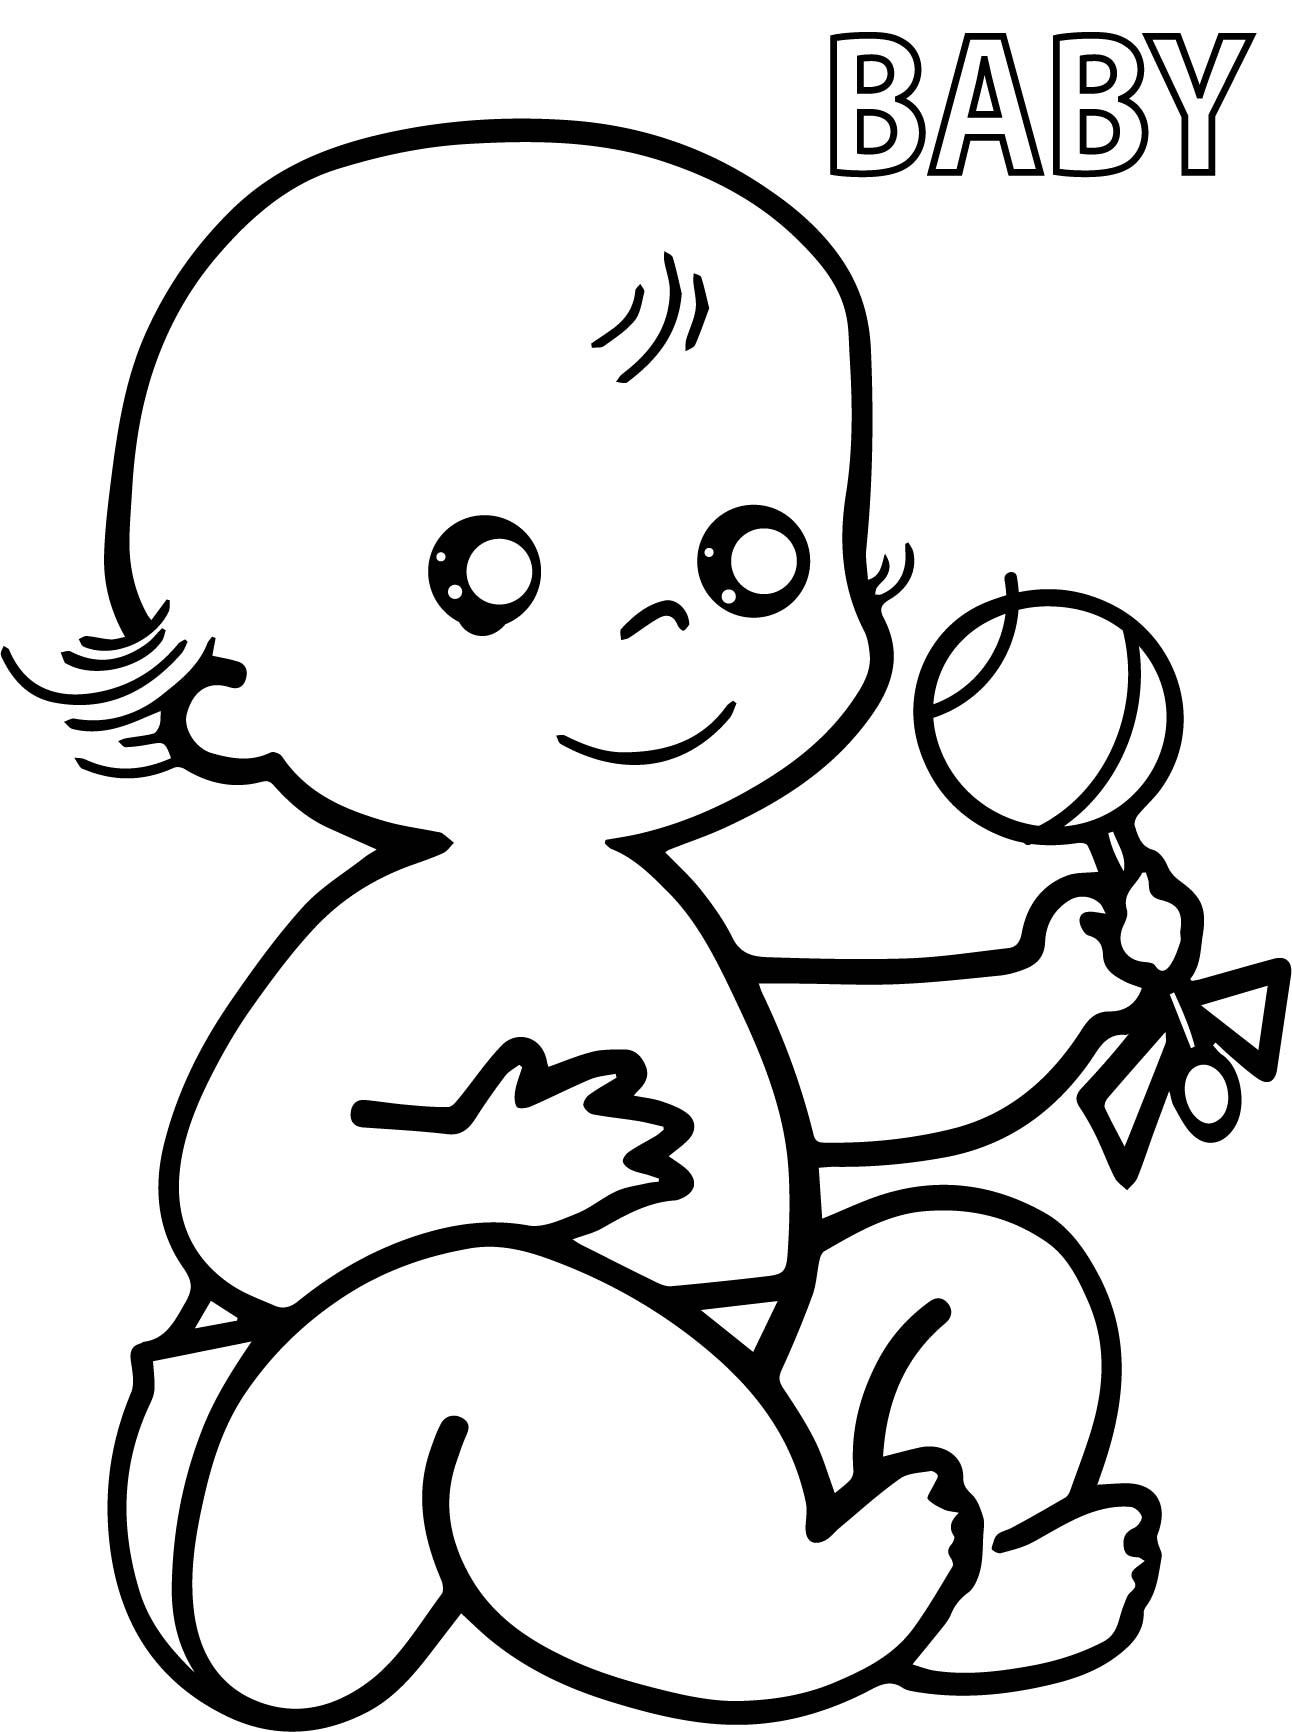 Coloring Pages Baby
 Preschool Baby Coloring Pages